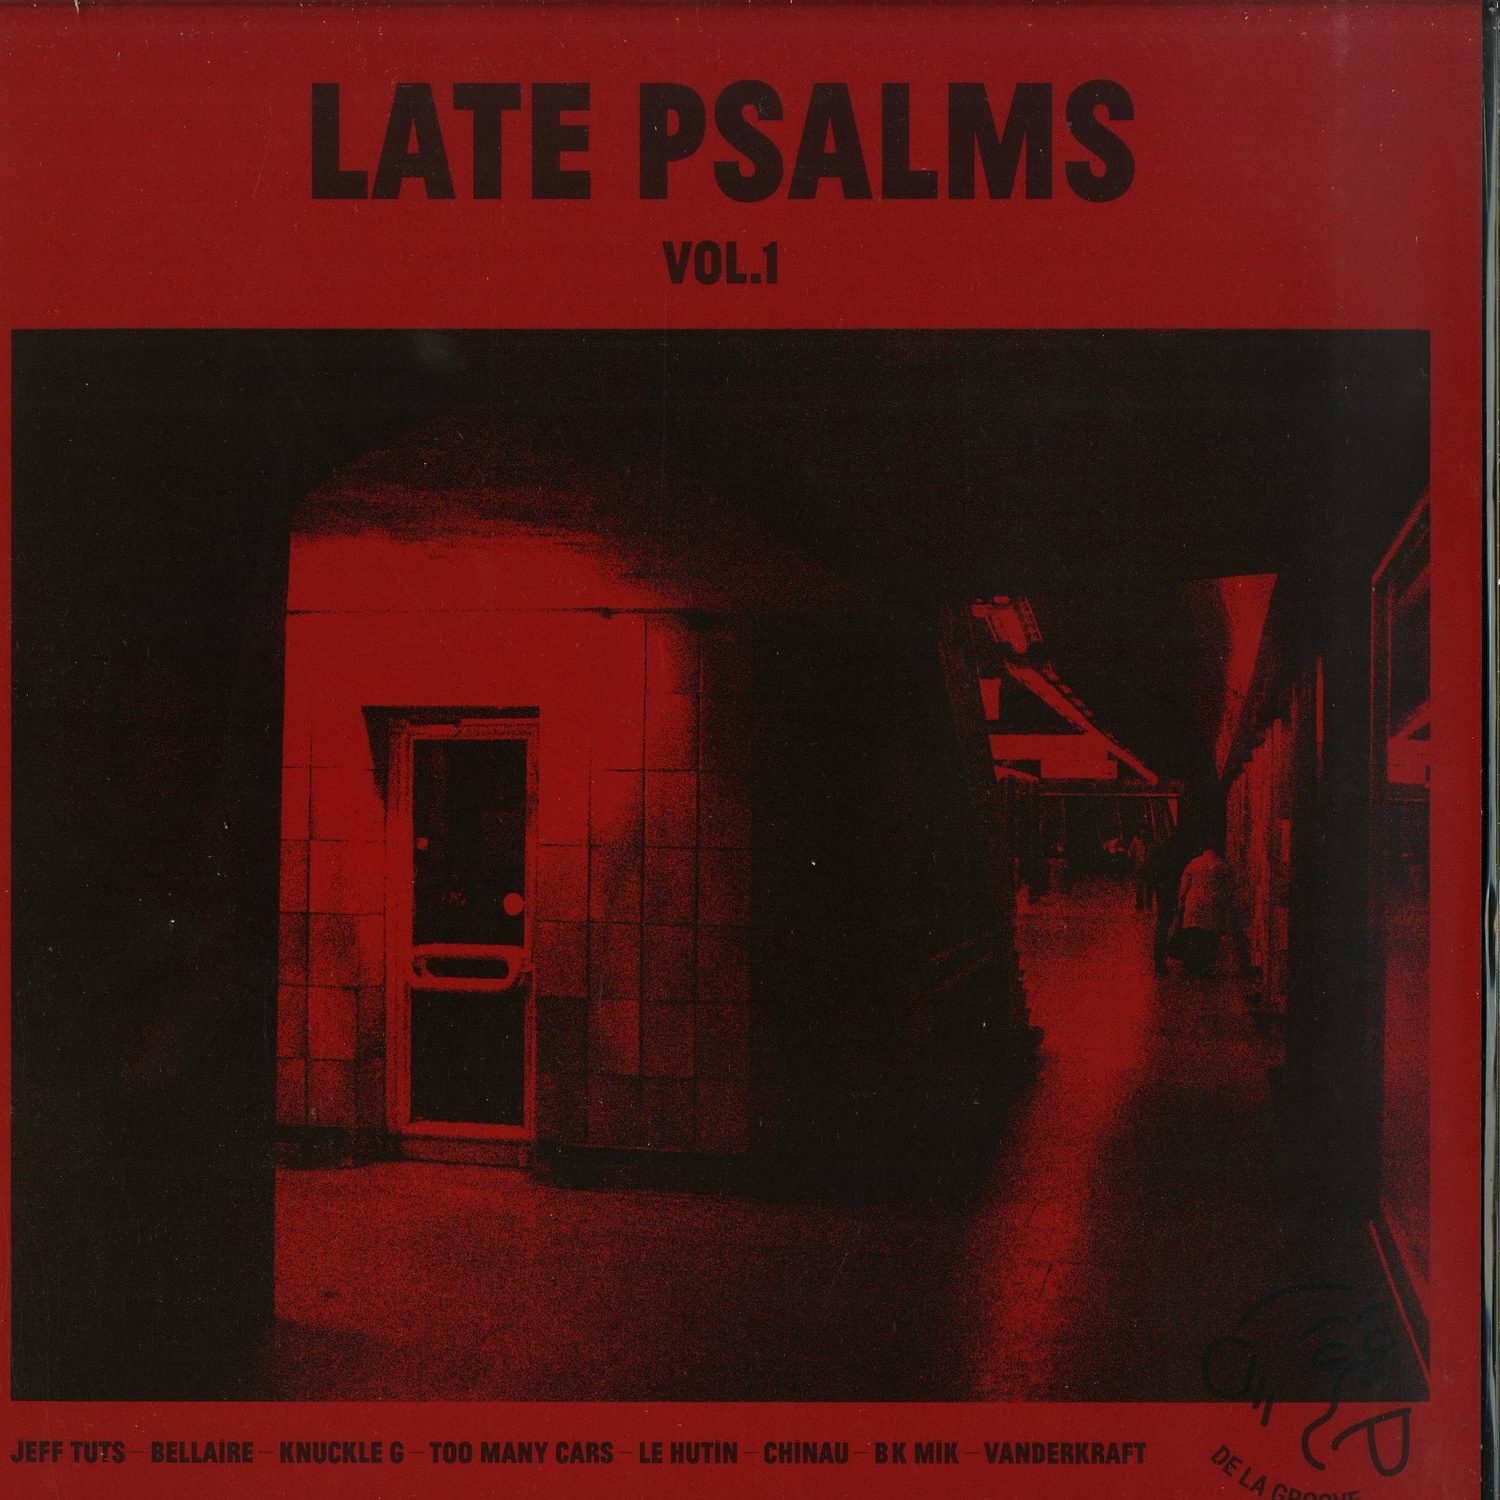 Various Artists - LATE PSALMS VOL. I